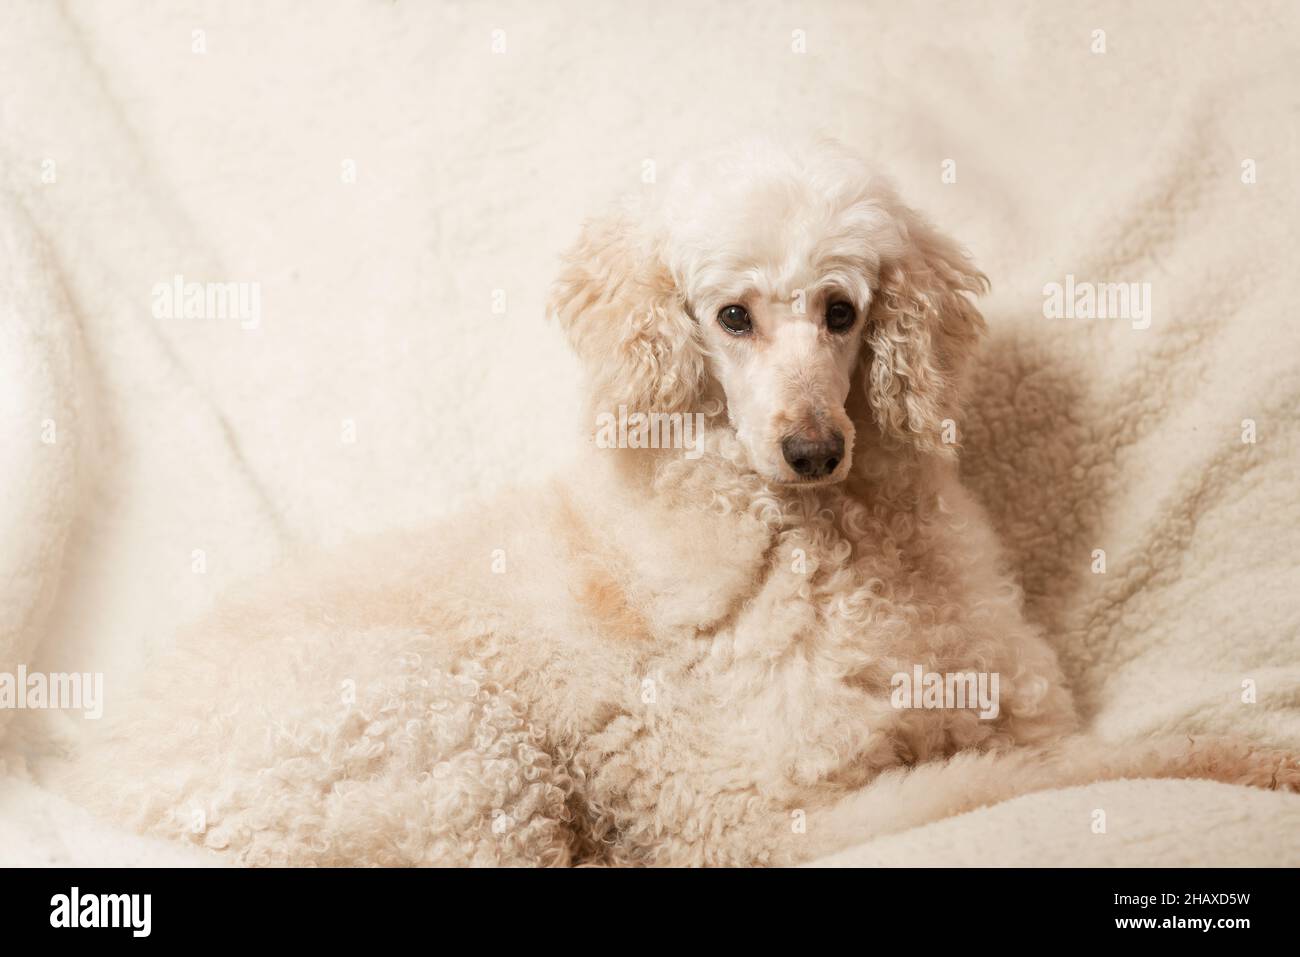 A large dog, a royal poodle, is proudly lying on the couch Stock Photo